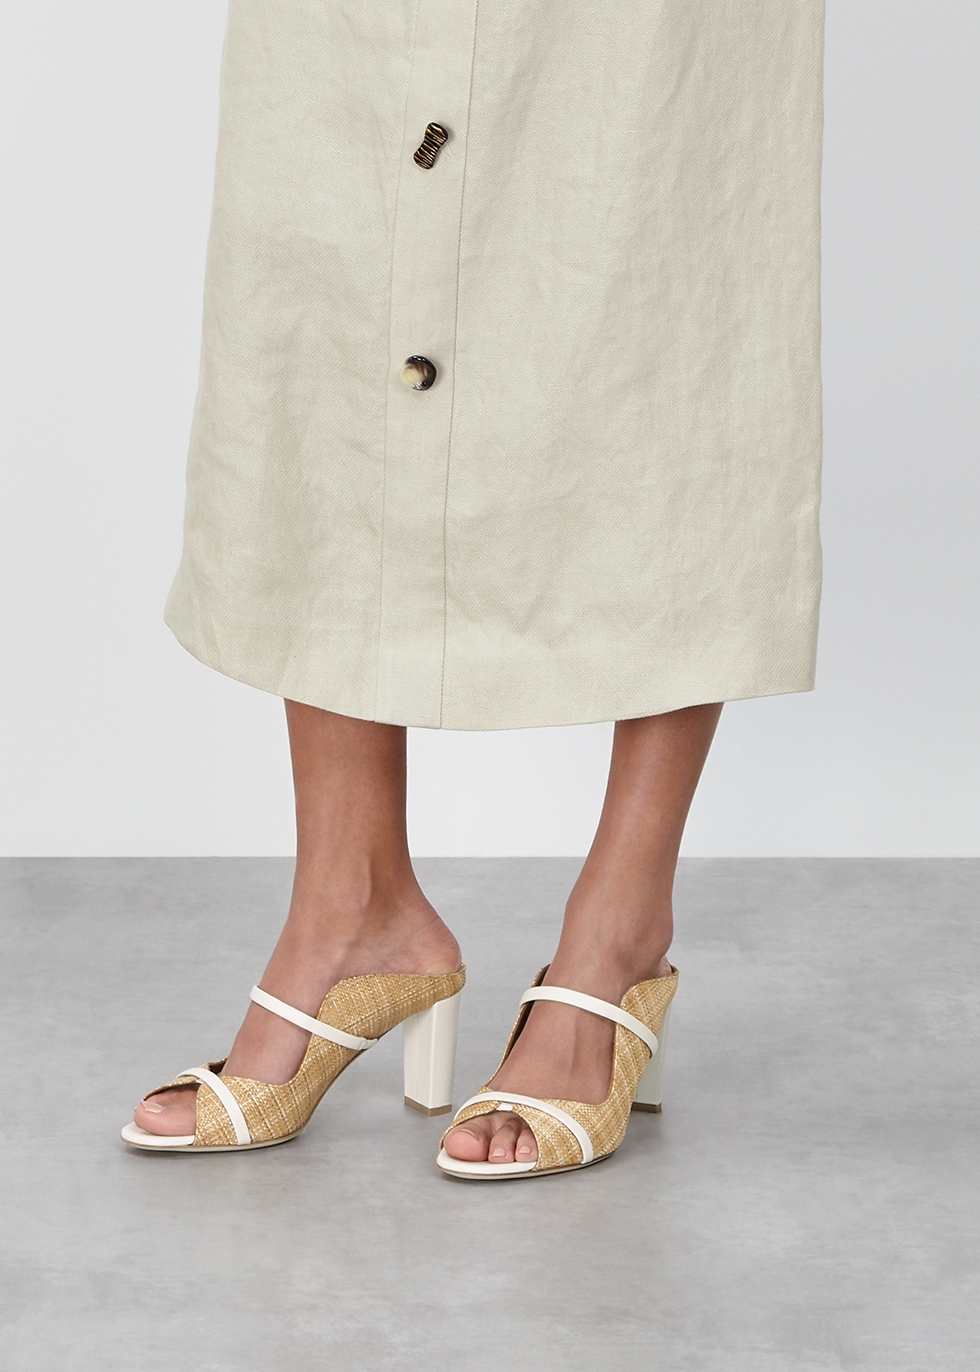 malone souliers sandals